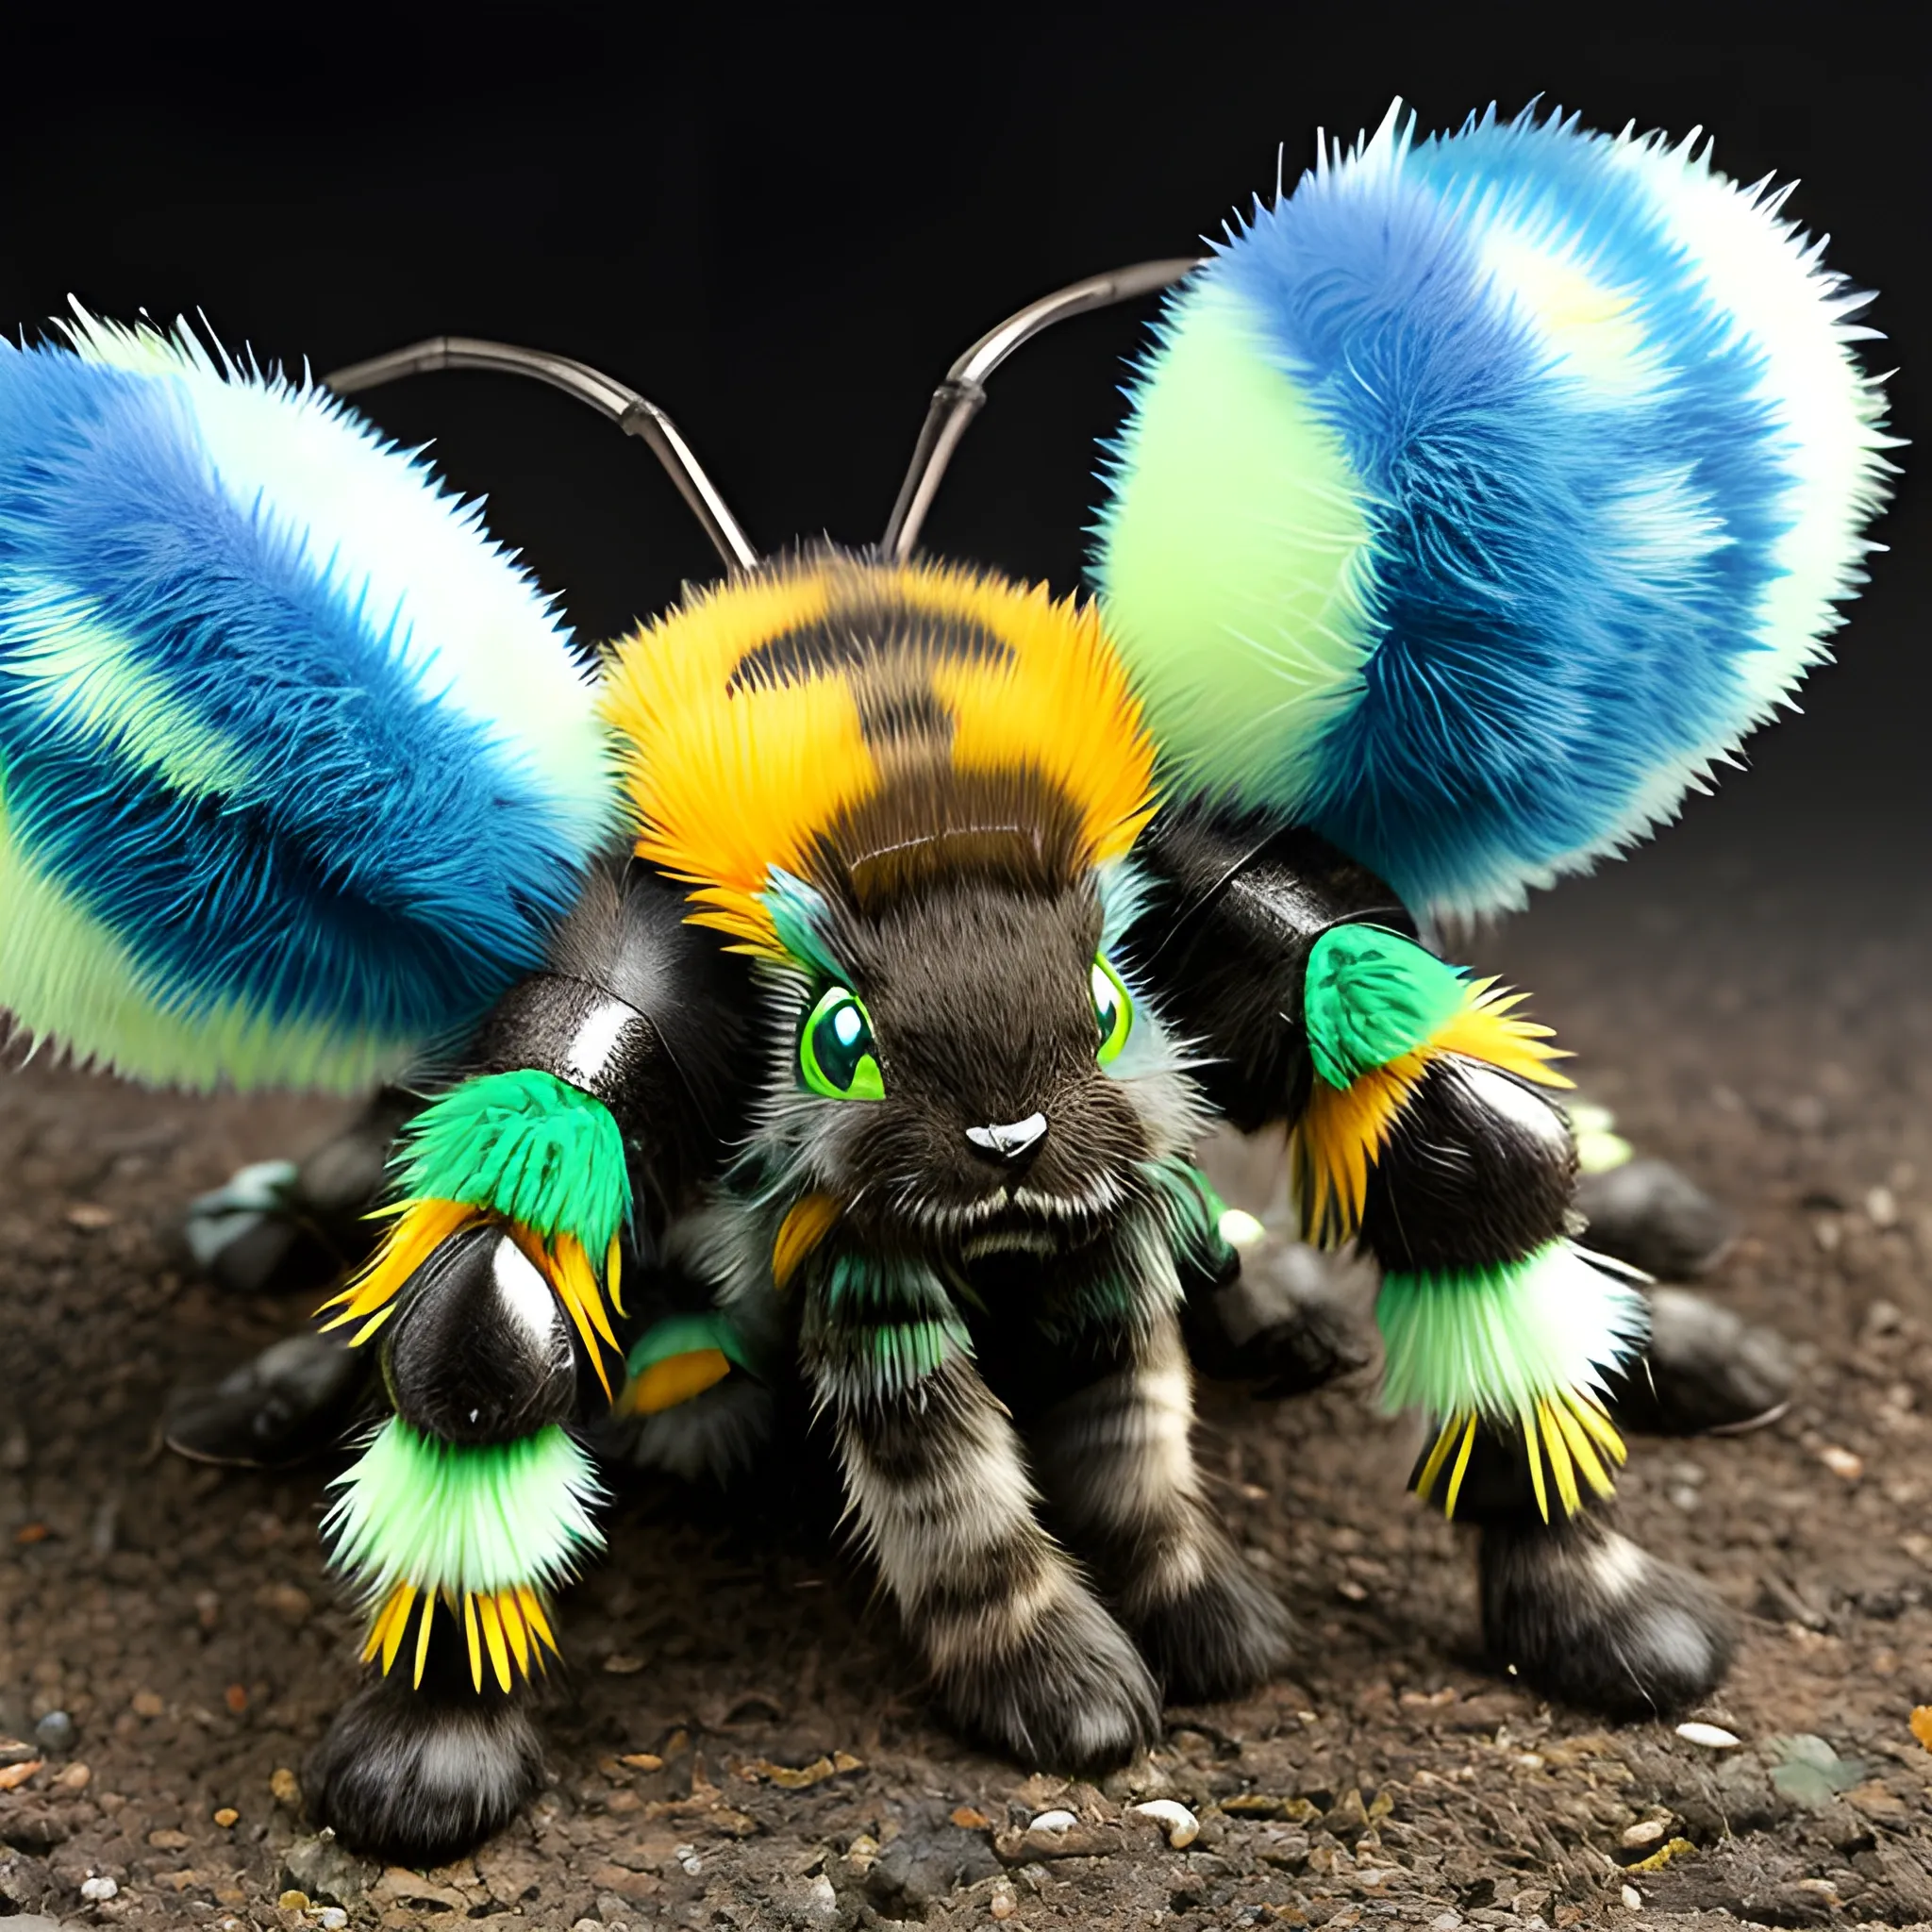 Insectile furry fluffy feline hybrid of rabbit and bumblebee, with blue and green and white stripes, with predatory mandibles and segmented body and six jointed legs with tube feet, with brightly coloured eggs, on rough scrubland, at night, very detailed, Trippy